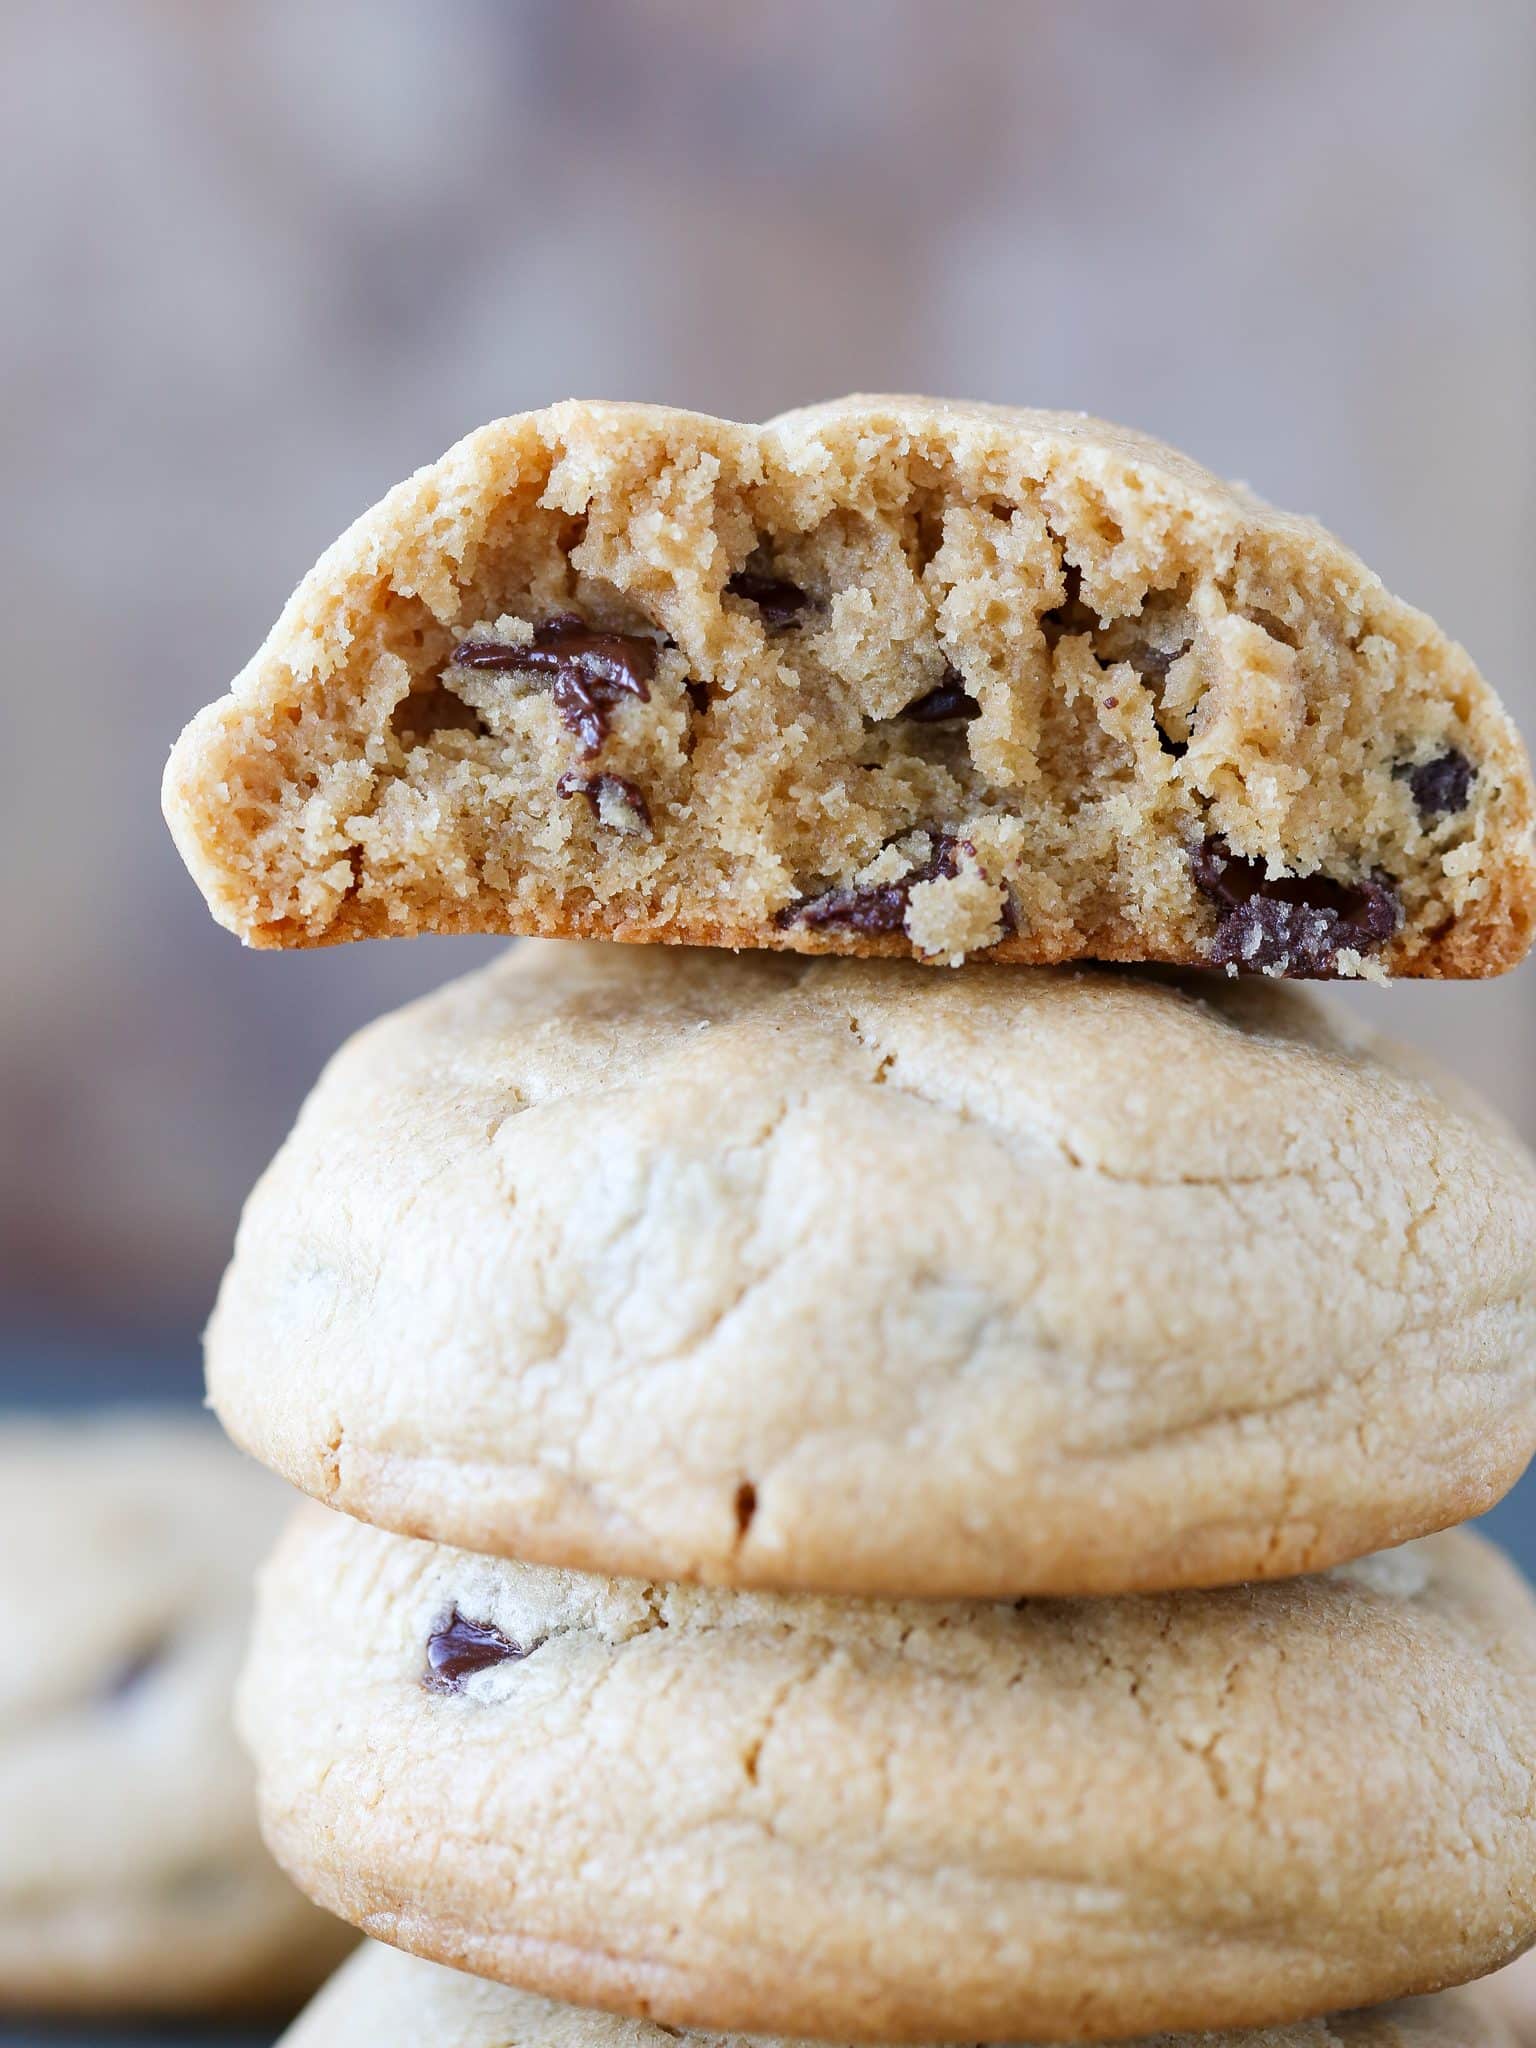 A stack of three thick peanut butter chocolate chip cookies.